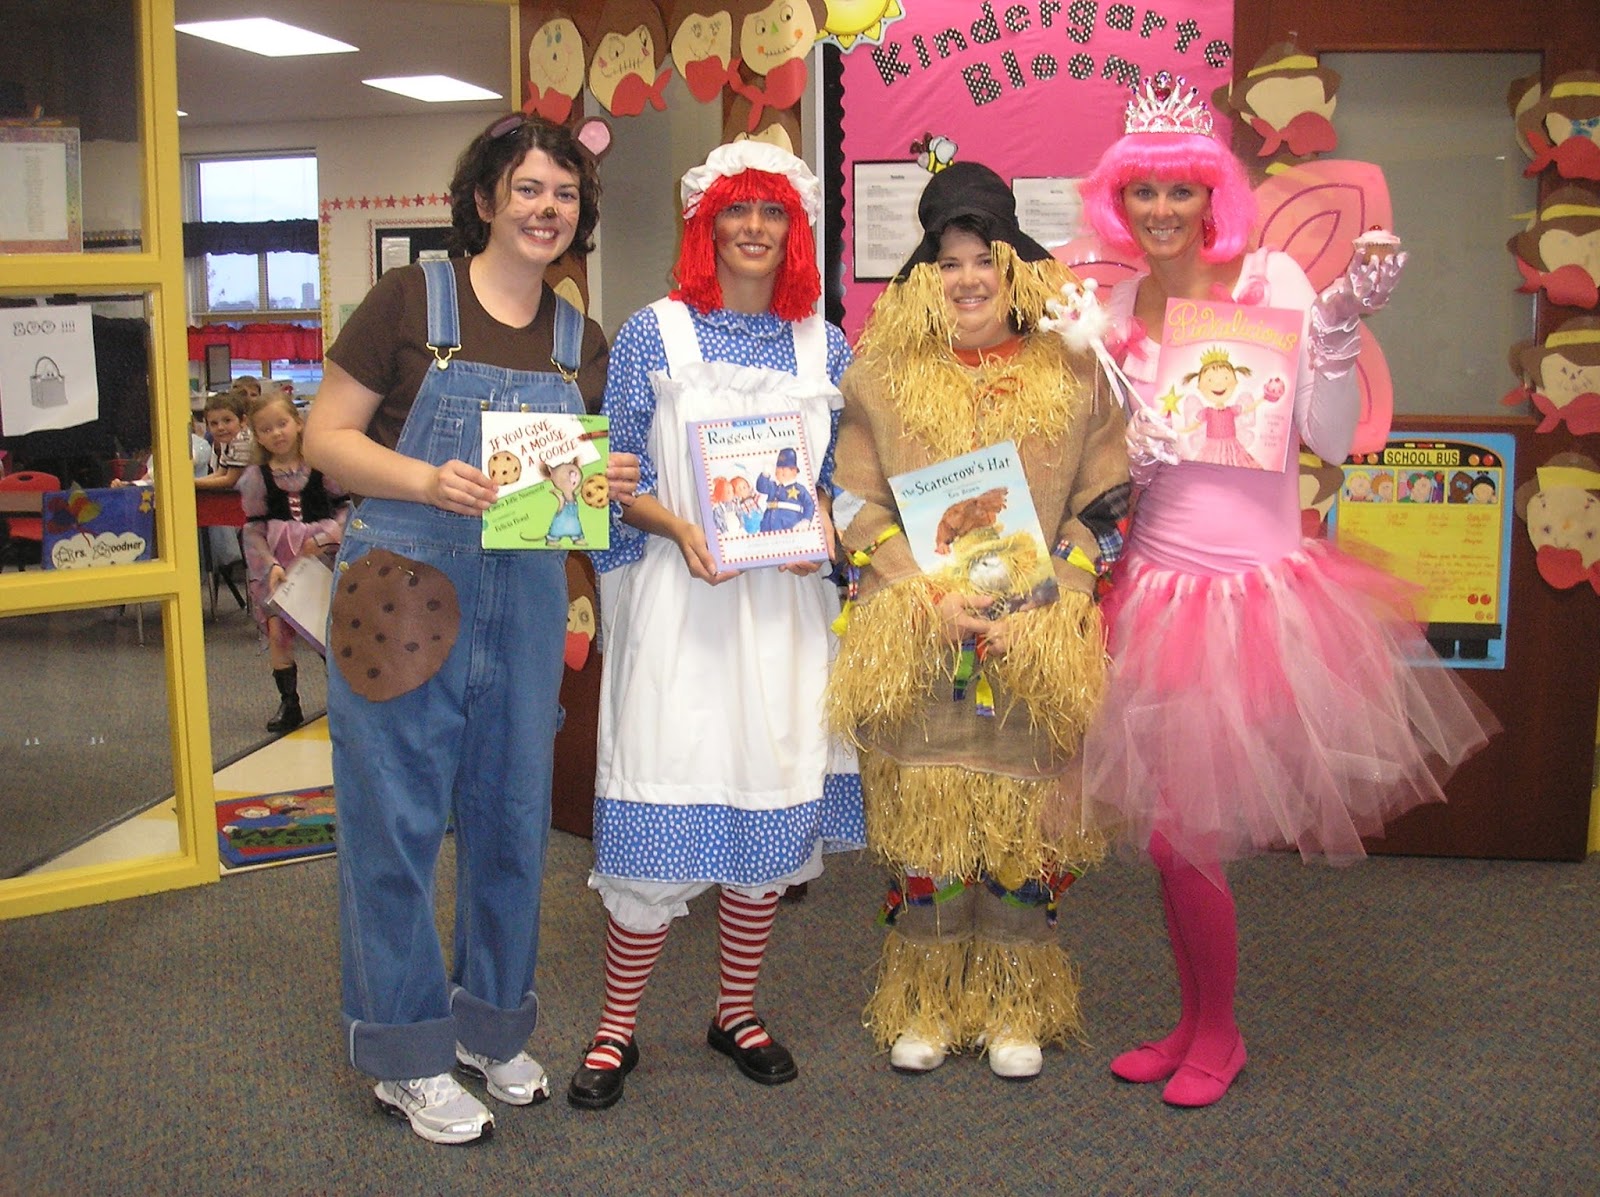 Book Character Day: Great Ideas for Teacher Costumes - Teaching the Stars